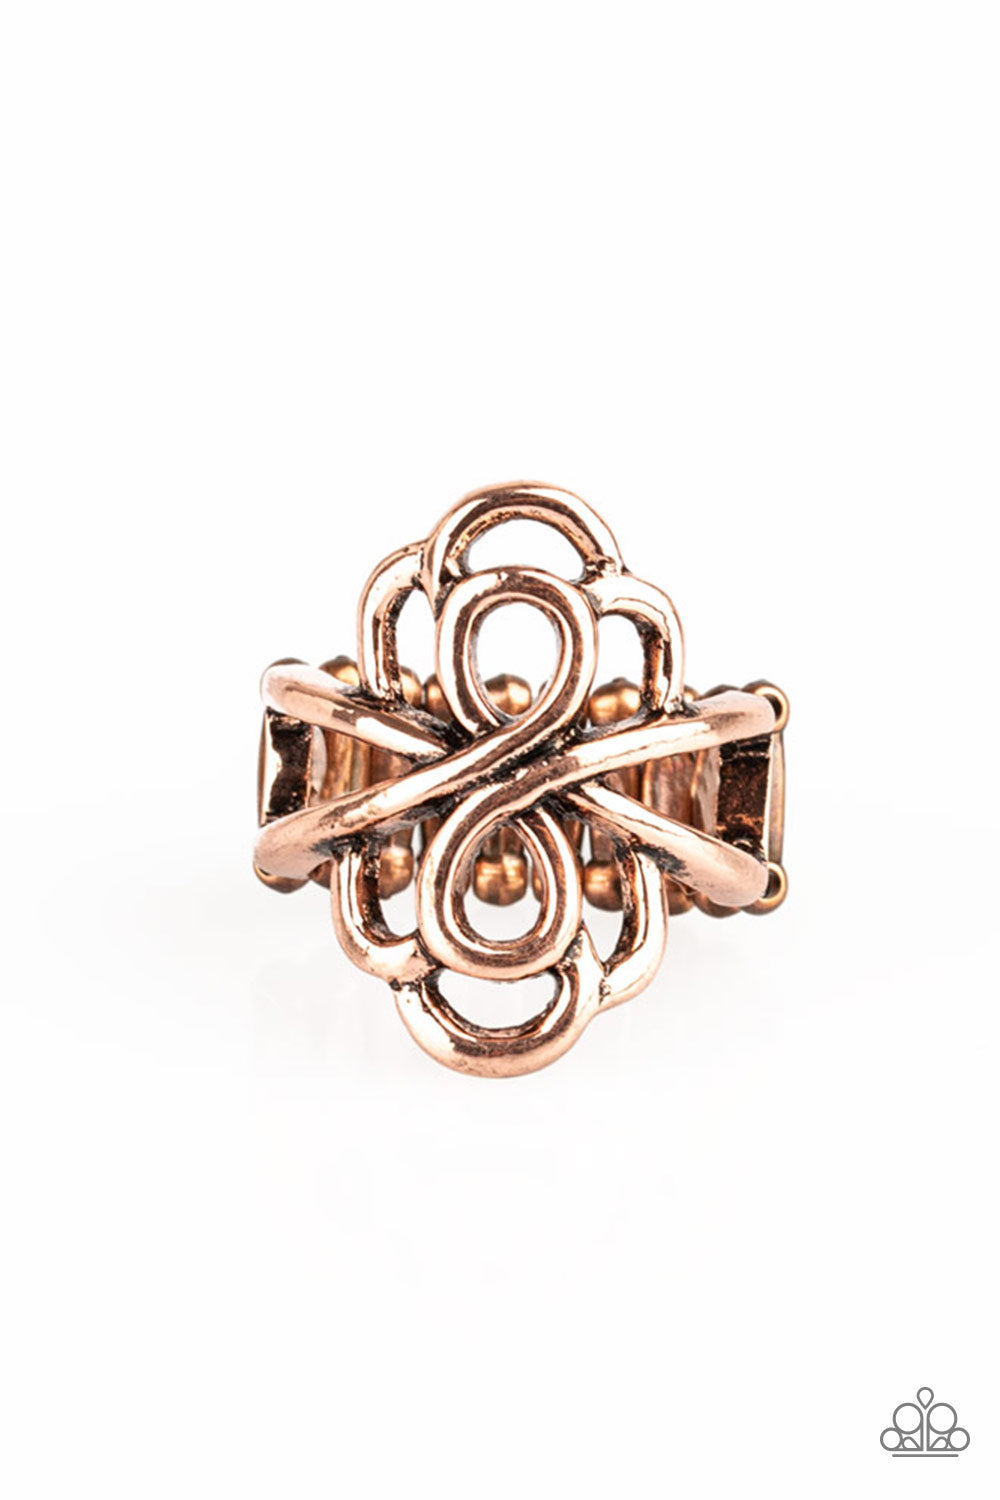 Ever Entwined Copper Paparazzi Rings Cashmere Pink Jewels - Cashmere Pink Jewels & Accessories, Cashmere Pink Jewels & Accessories - Paparazzi